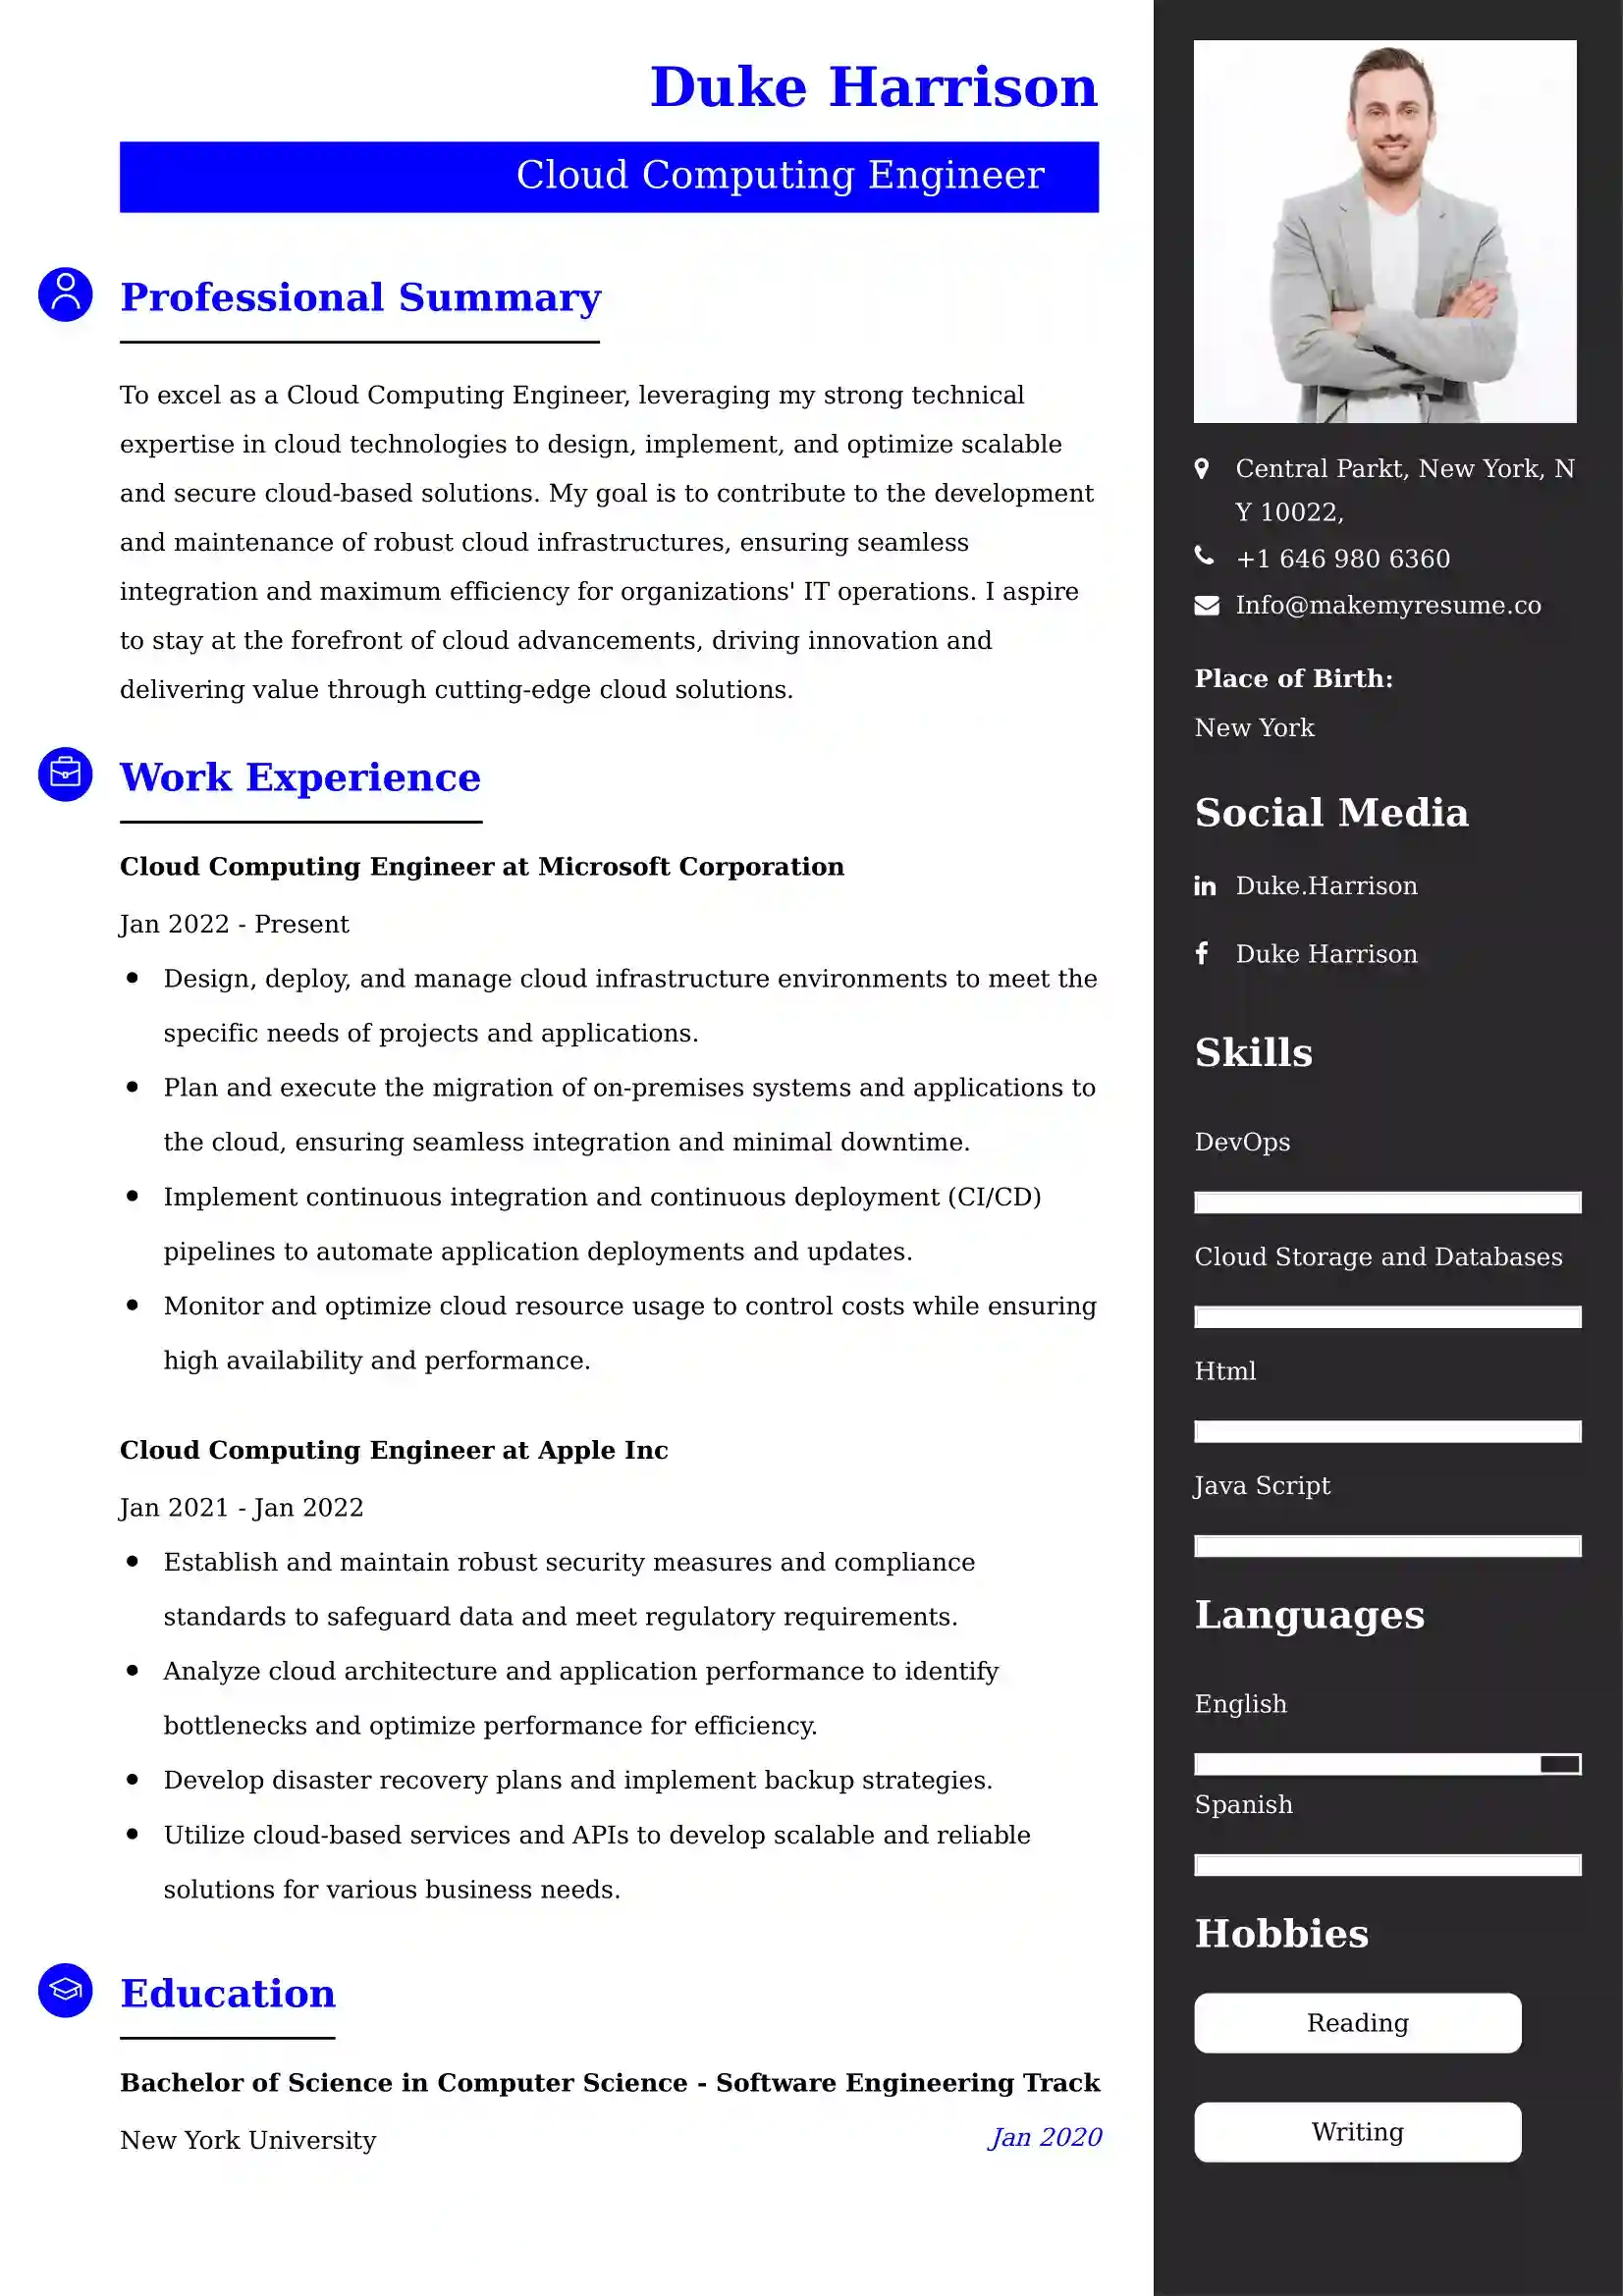 75+ Professional Computers & Software Resume Examples, Latest Format